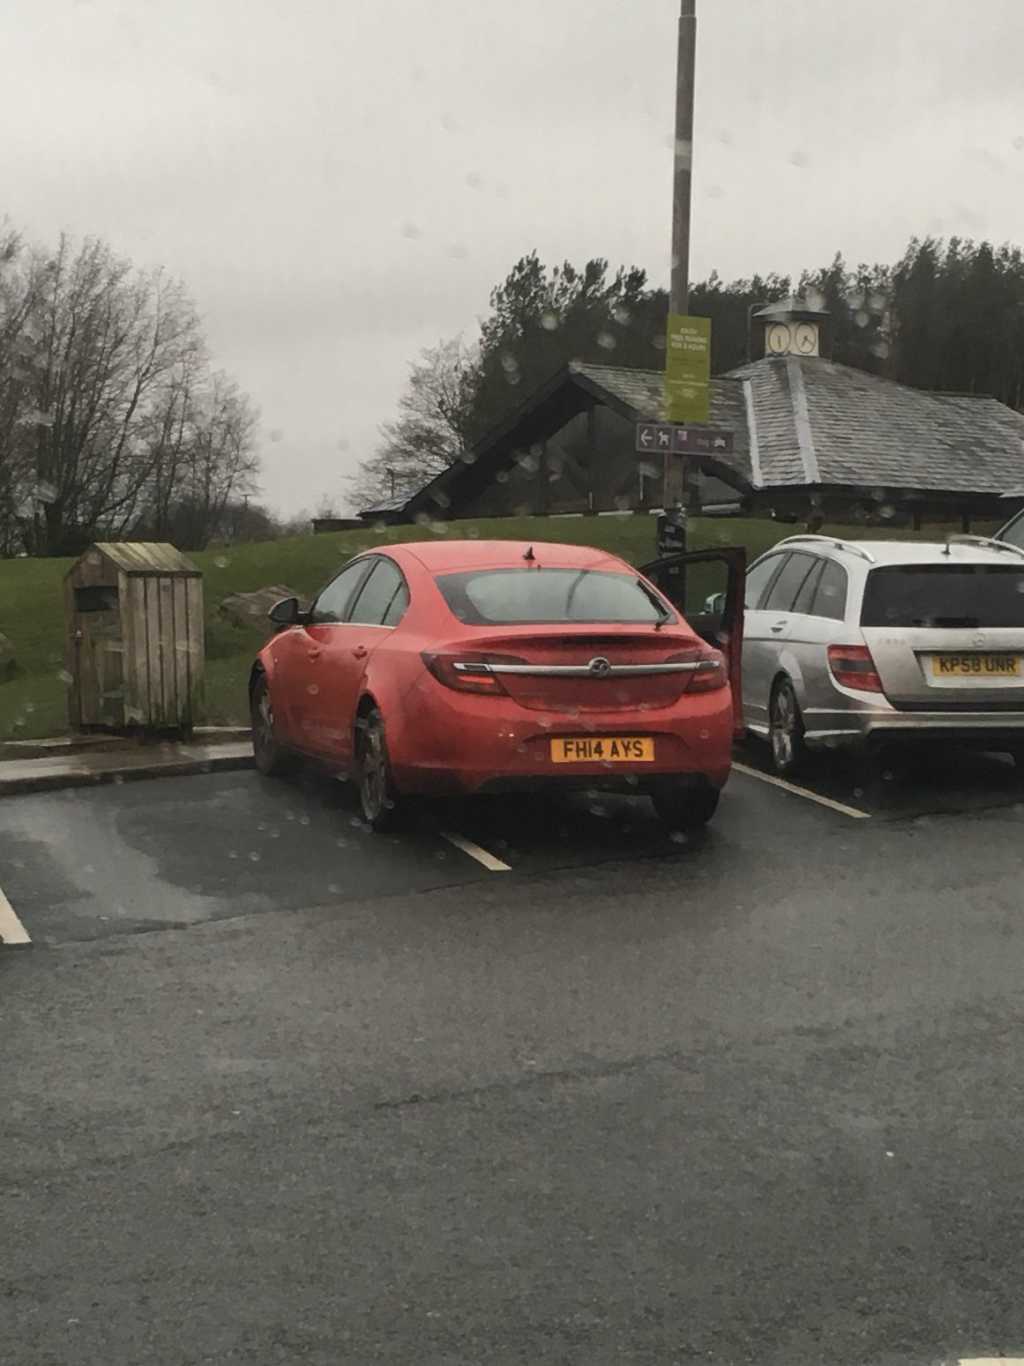 FH14 AYS displaying Inconsiderate Parking